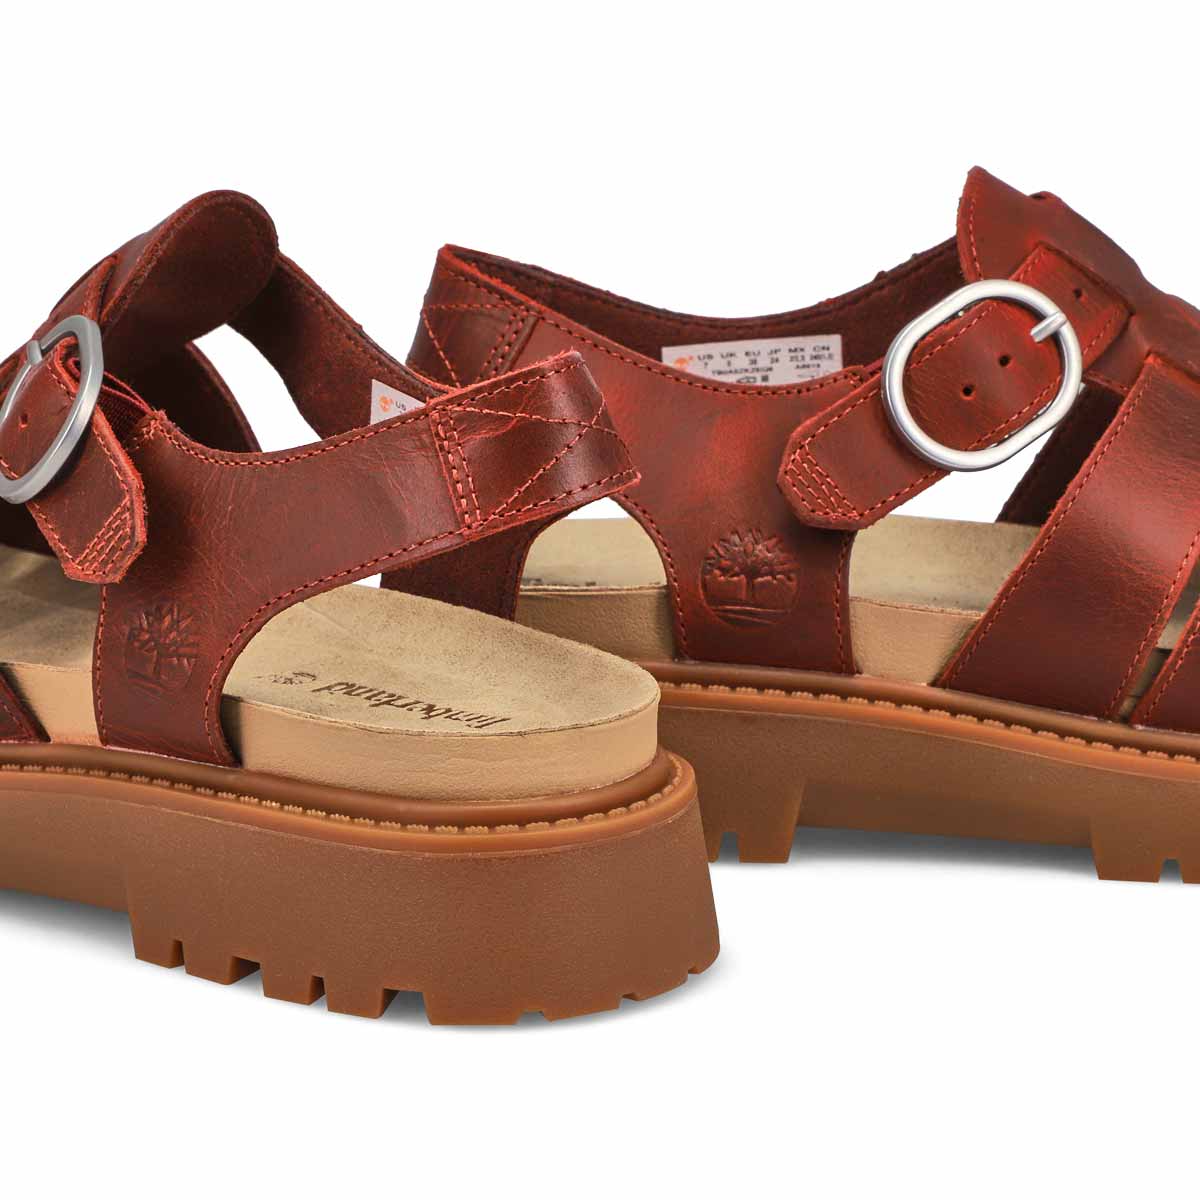 Women's Clairemont Way Casual Sandal - Dark Red